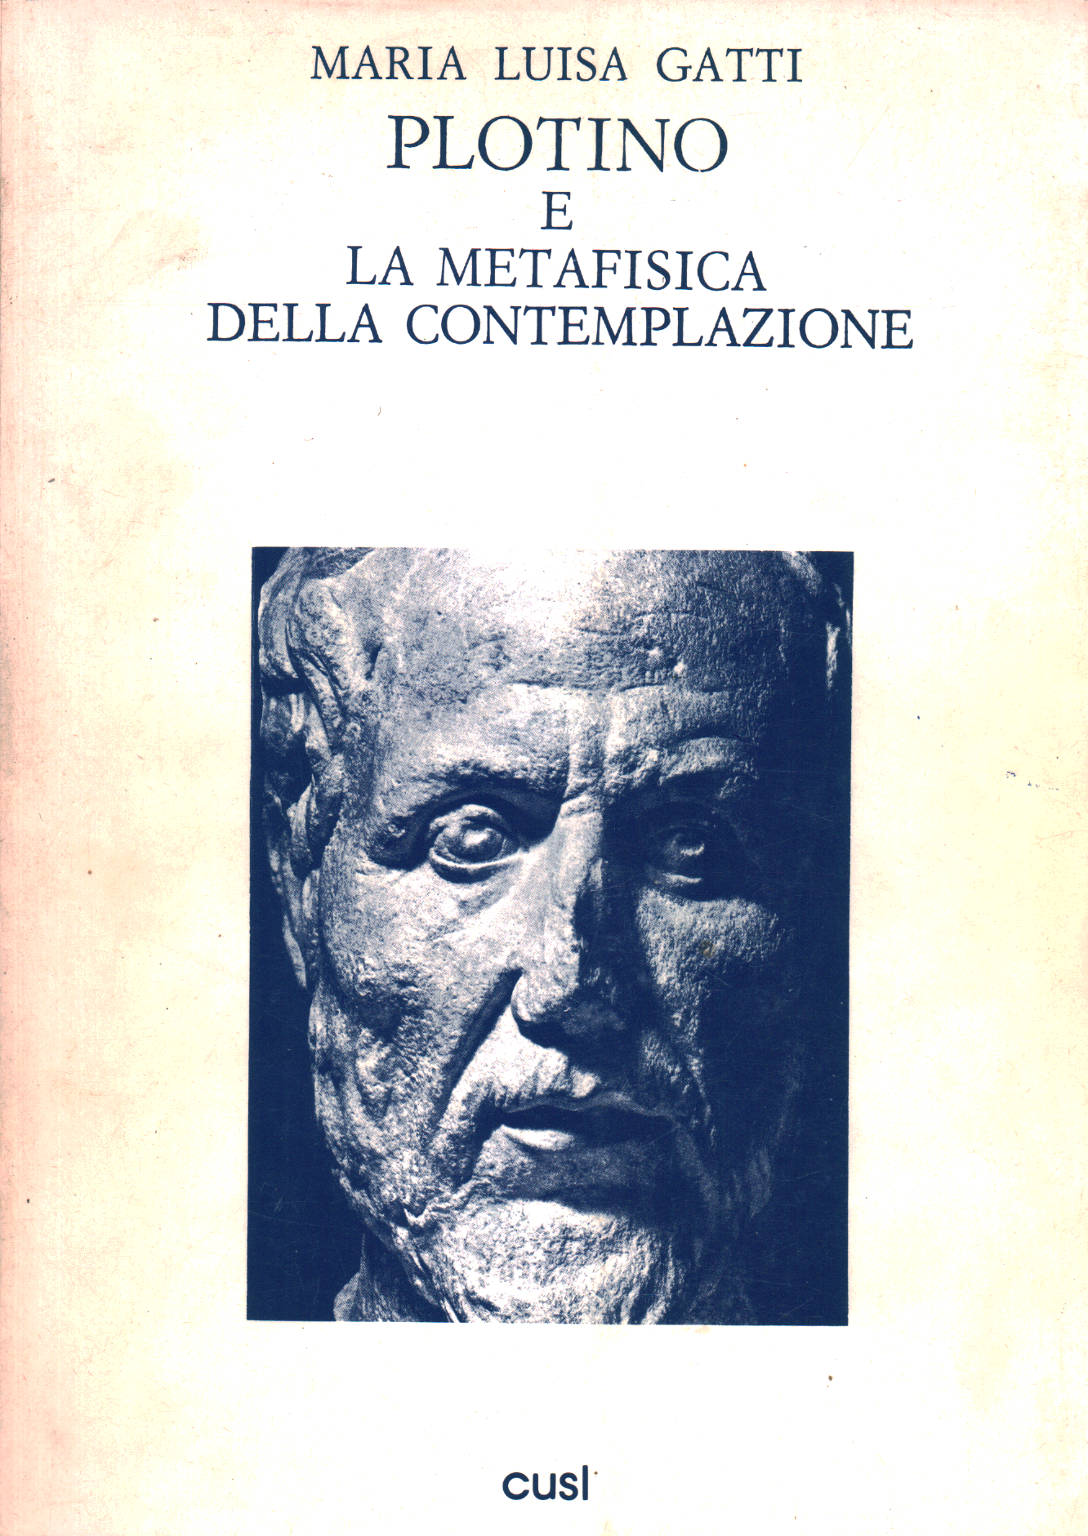 Plotinus and the metaphysics of contemplation